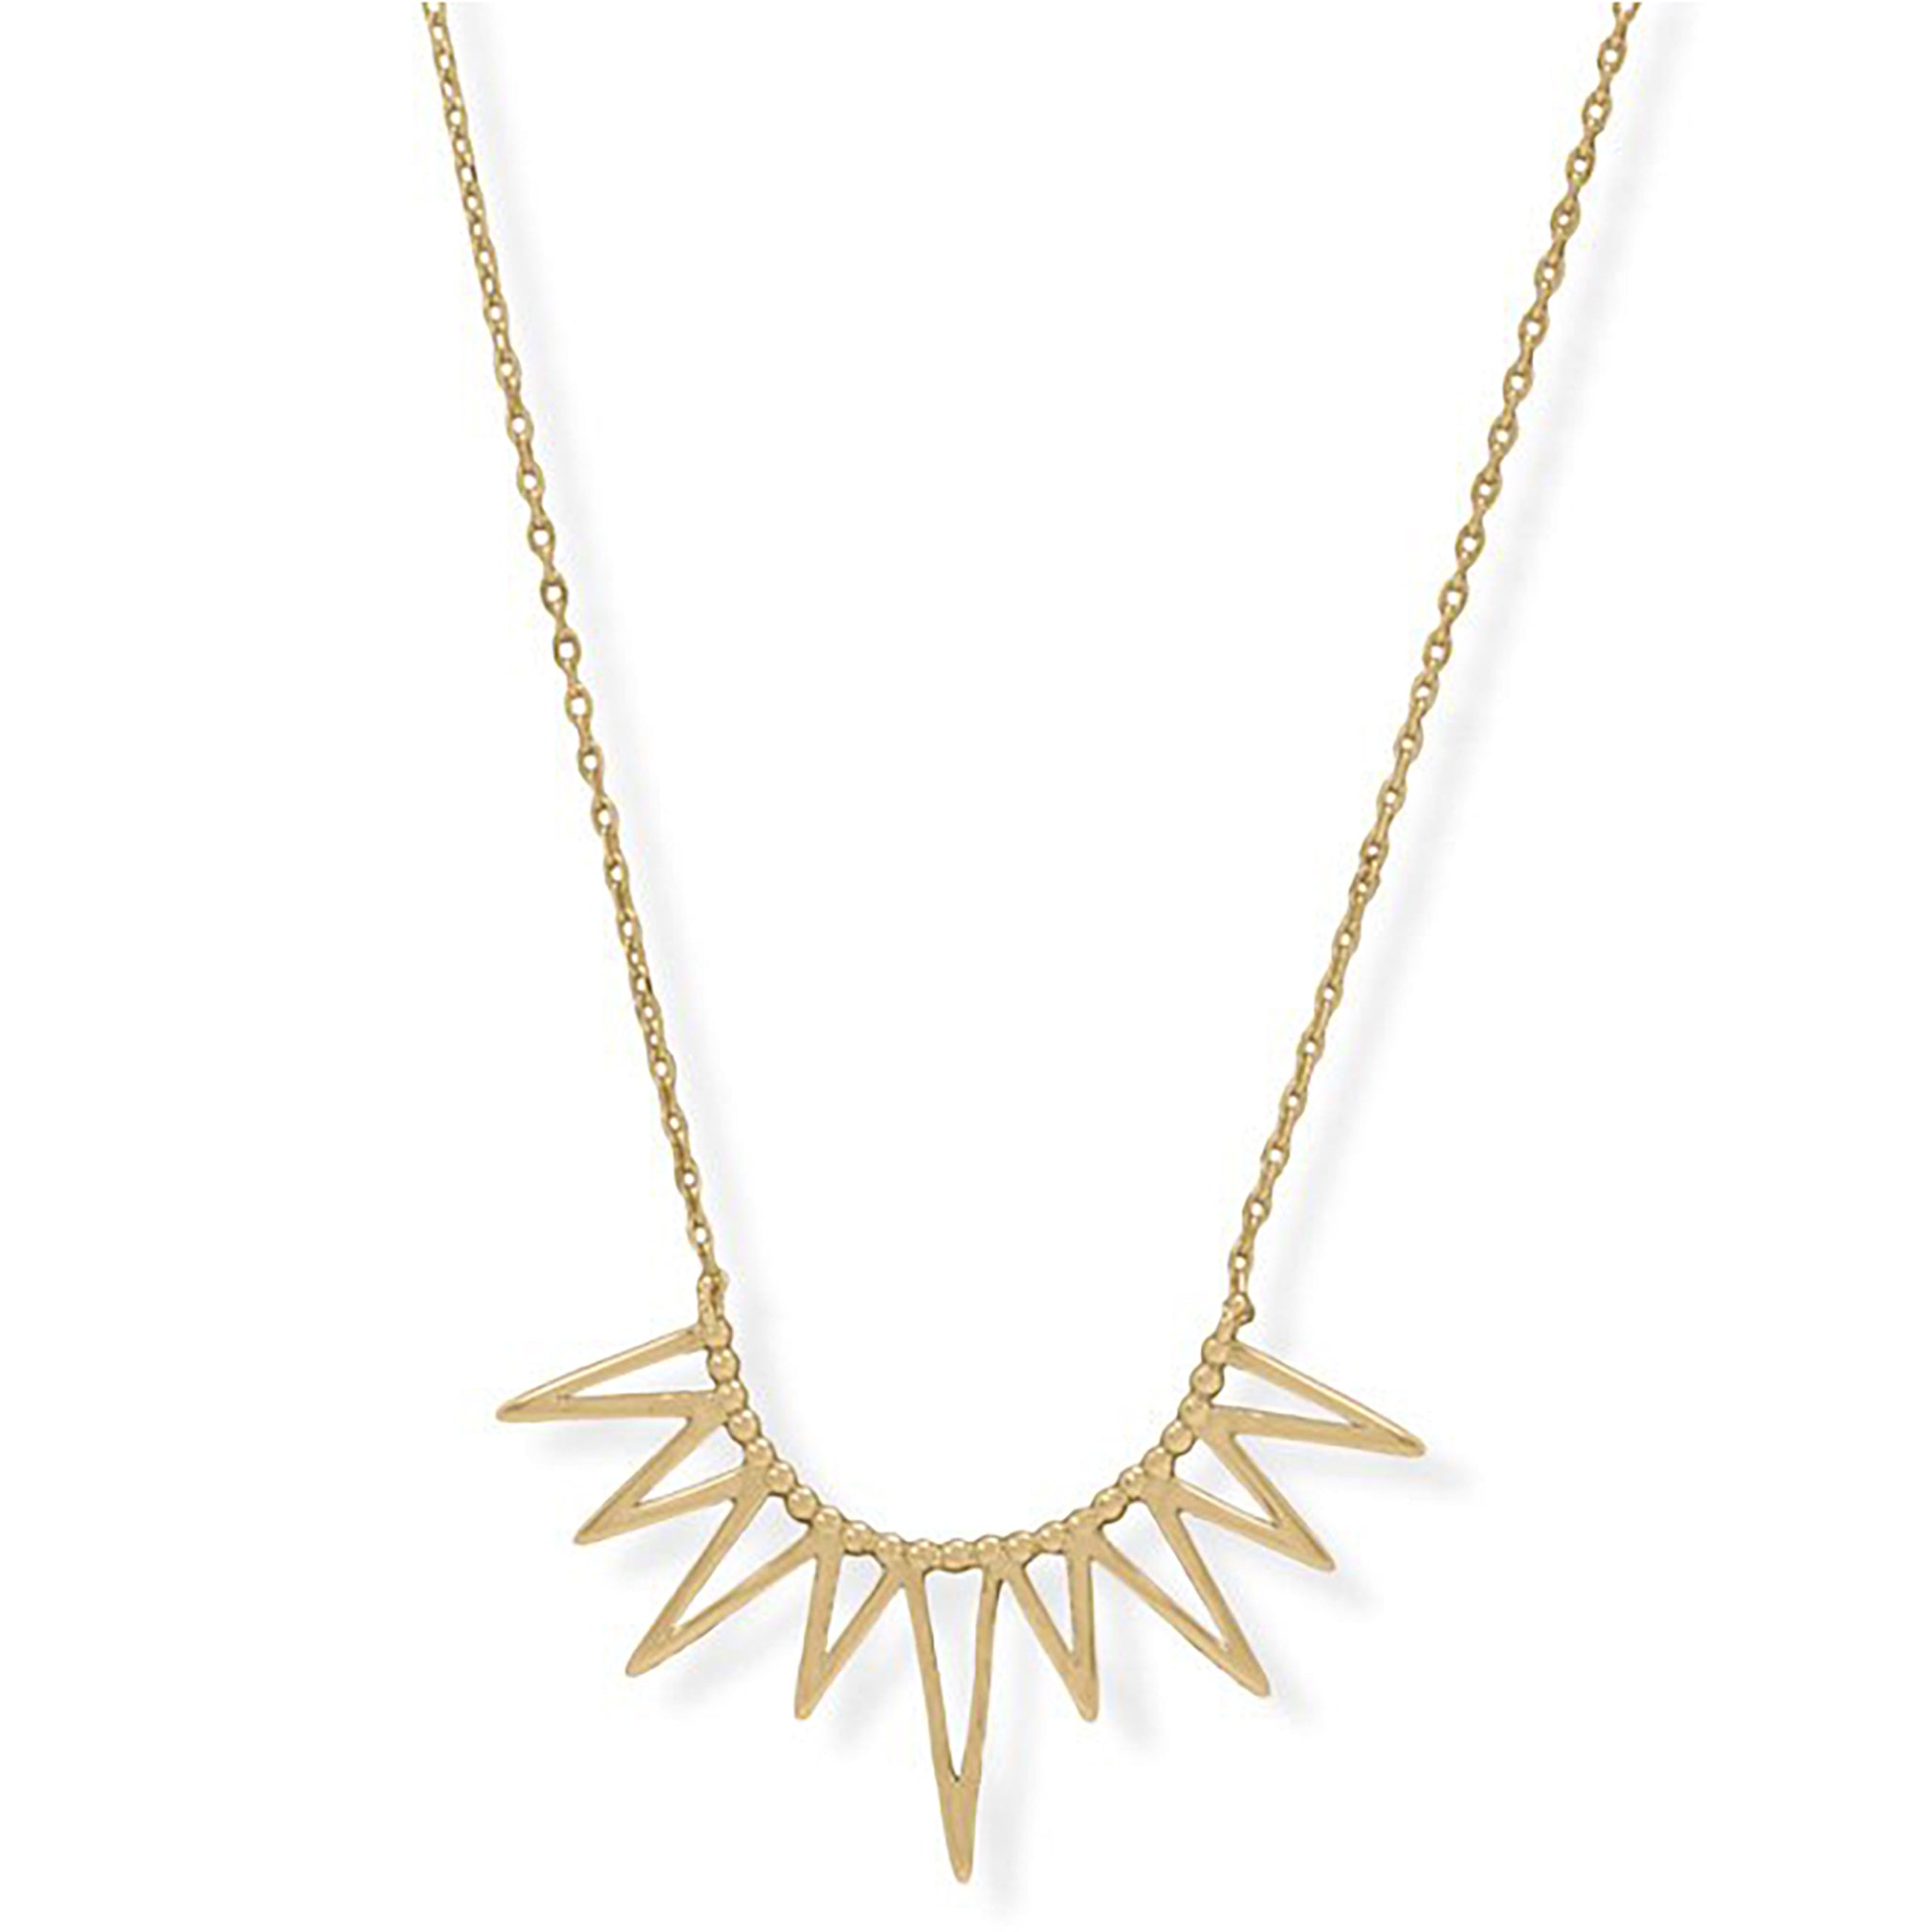 Sun Ray Design Gold Necklace